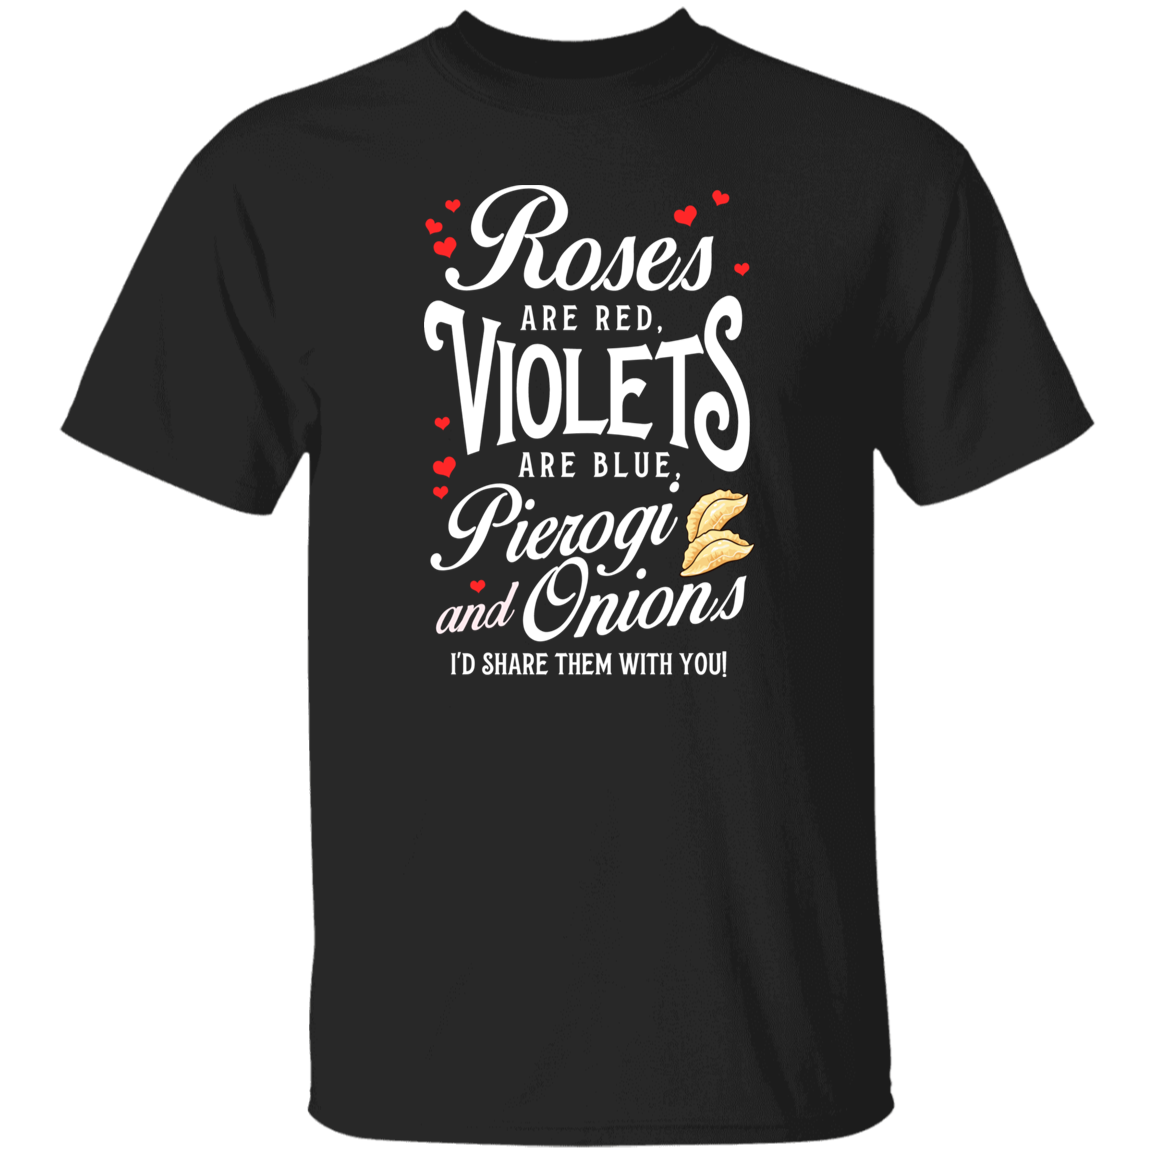 Roses Are Red Violets Are Blue Pierogi And Onions I'd Make Them For You Apparel CustomCat G500 5.3 oz. T-Shirt Black S